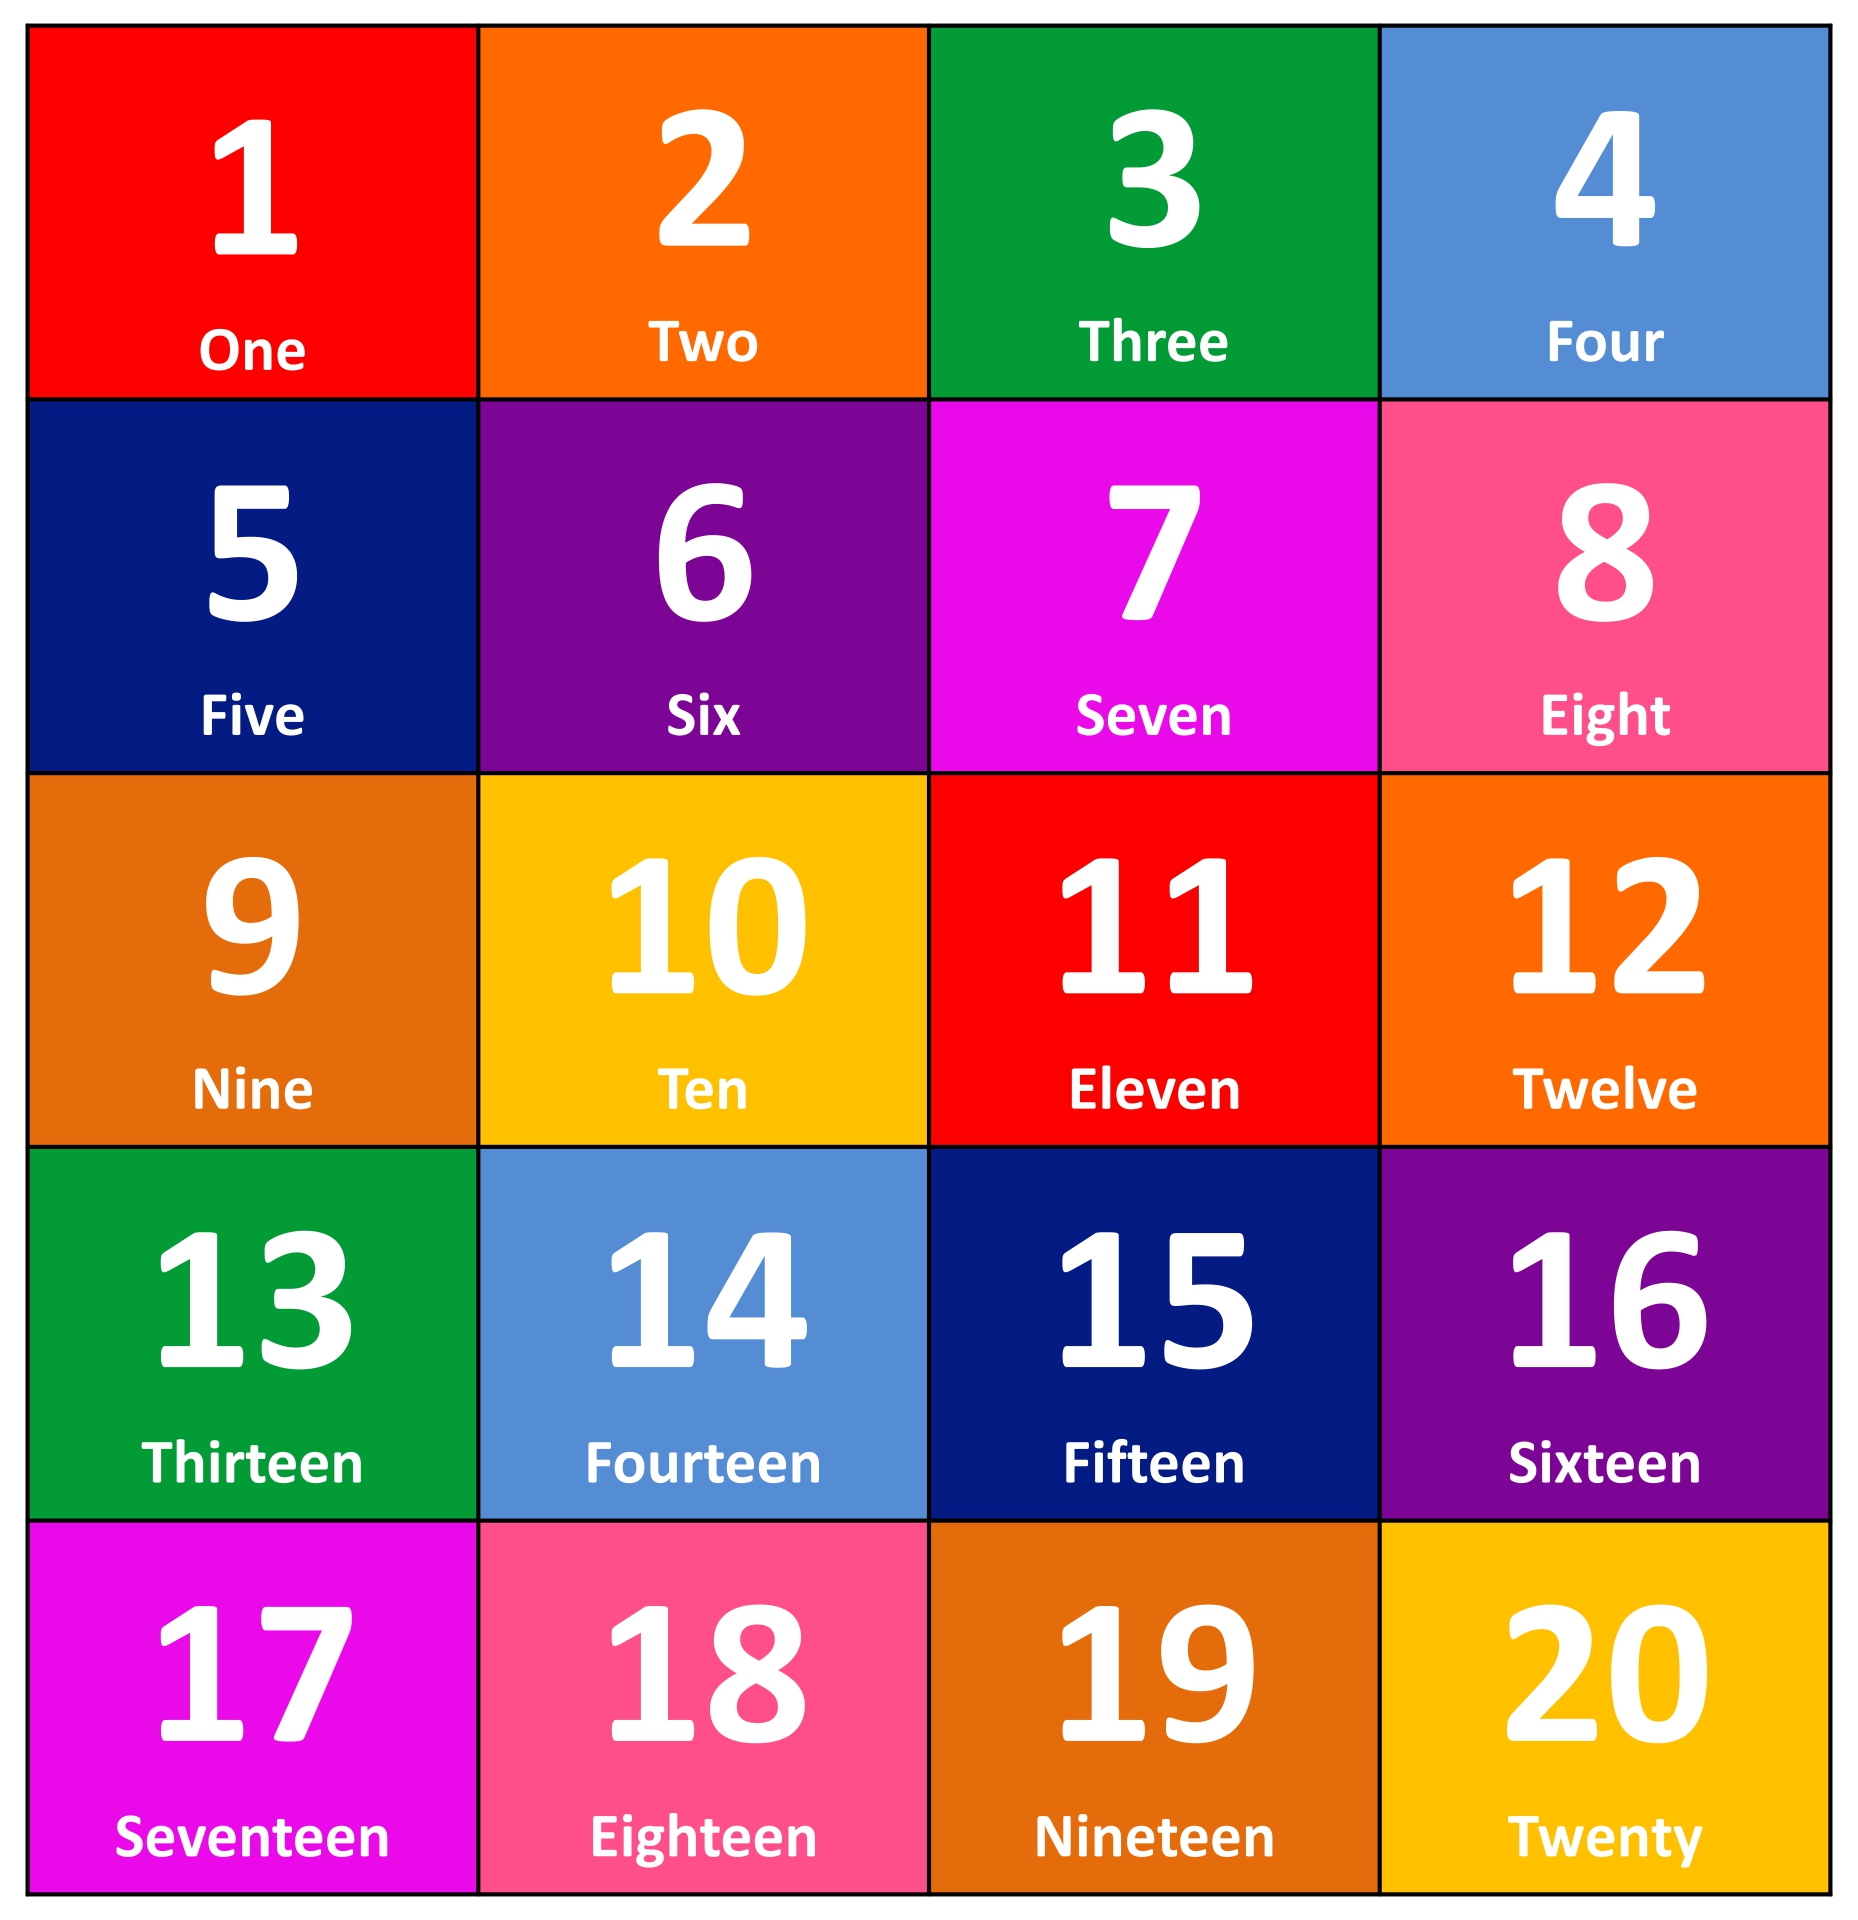 9-best-images-of-printable-numbers-from-1-30-printable-number-chart-1